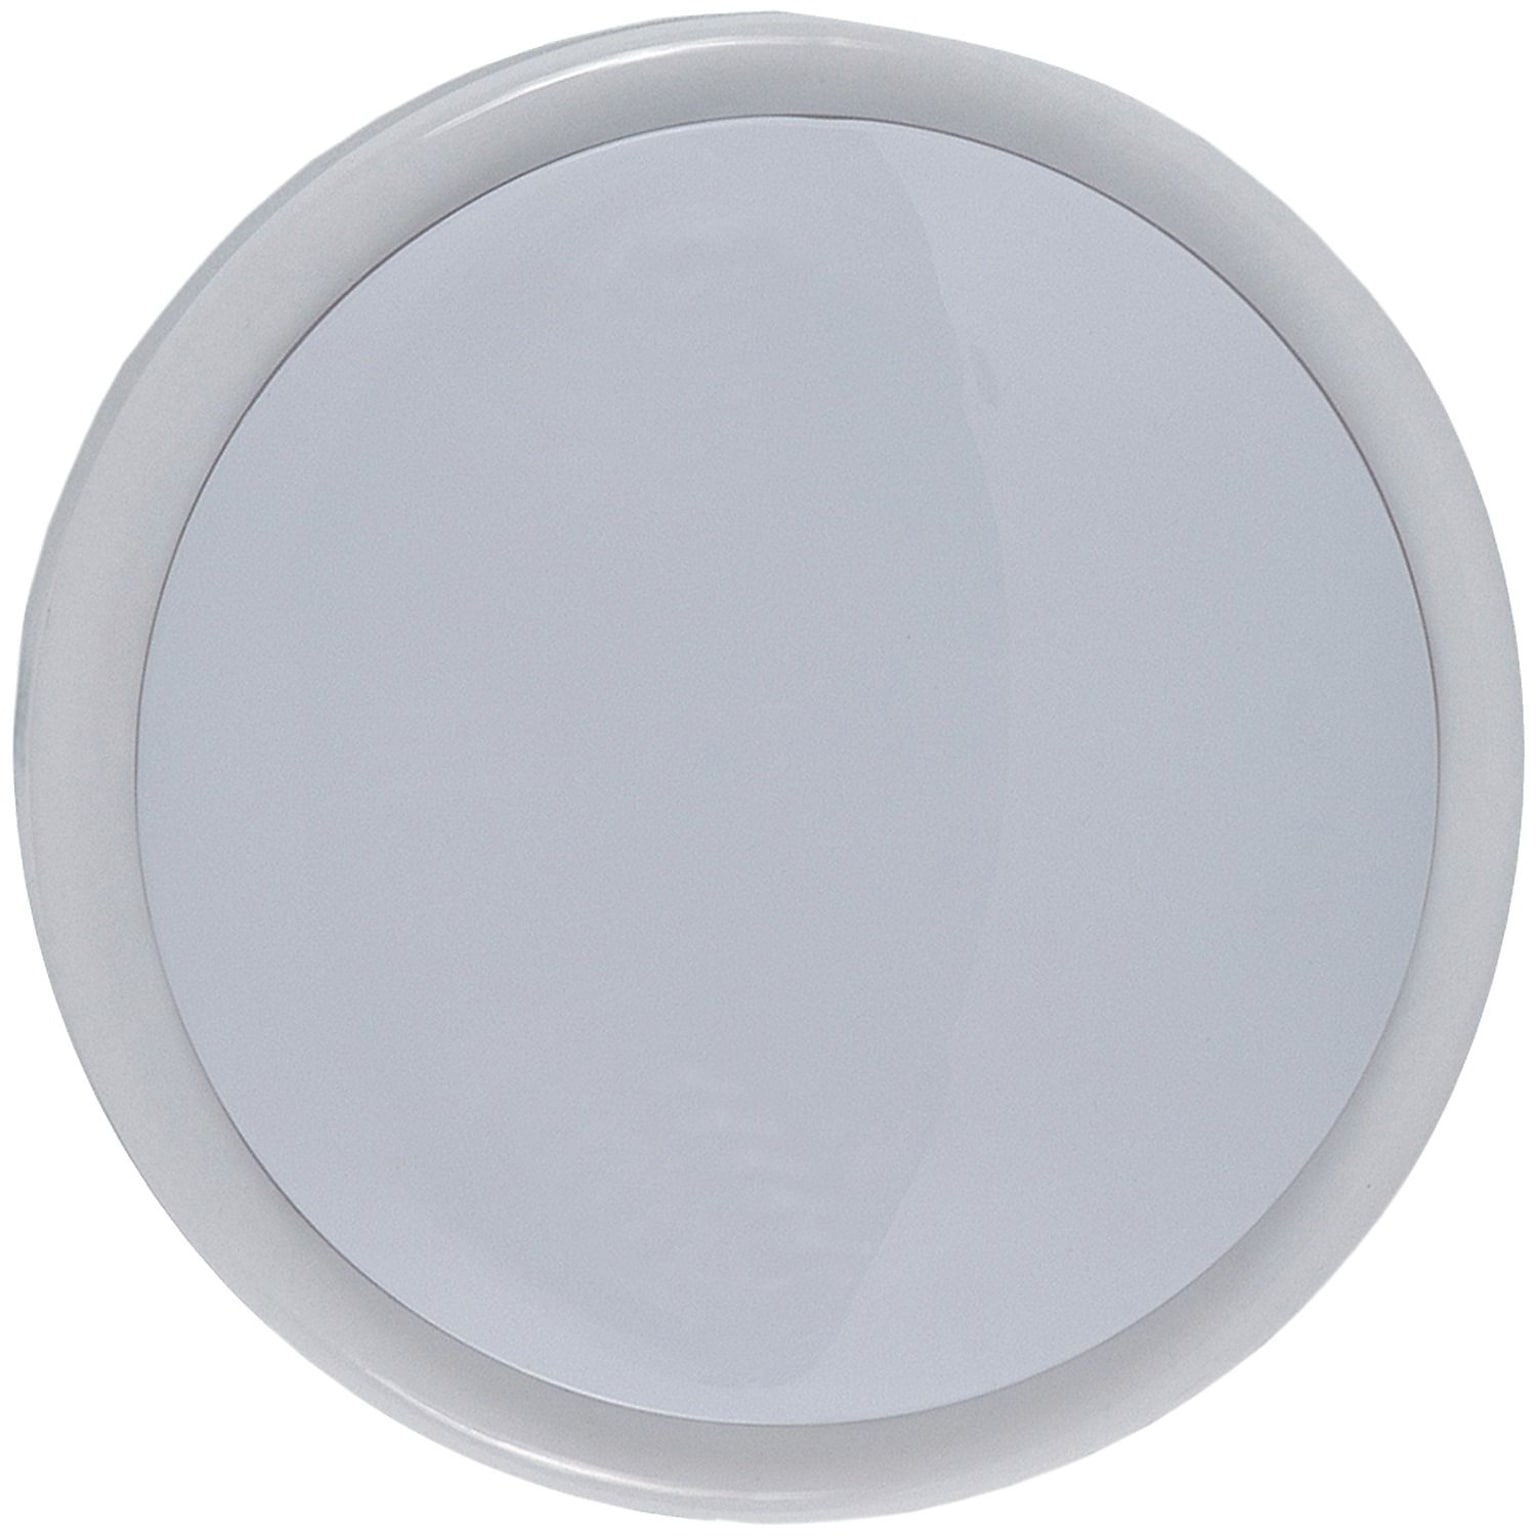 General Electric Push On/Off Led Utility Light, White (JAS54807)